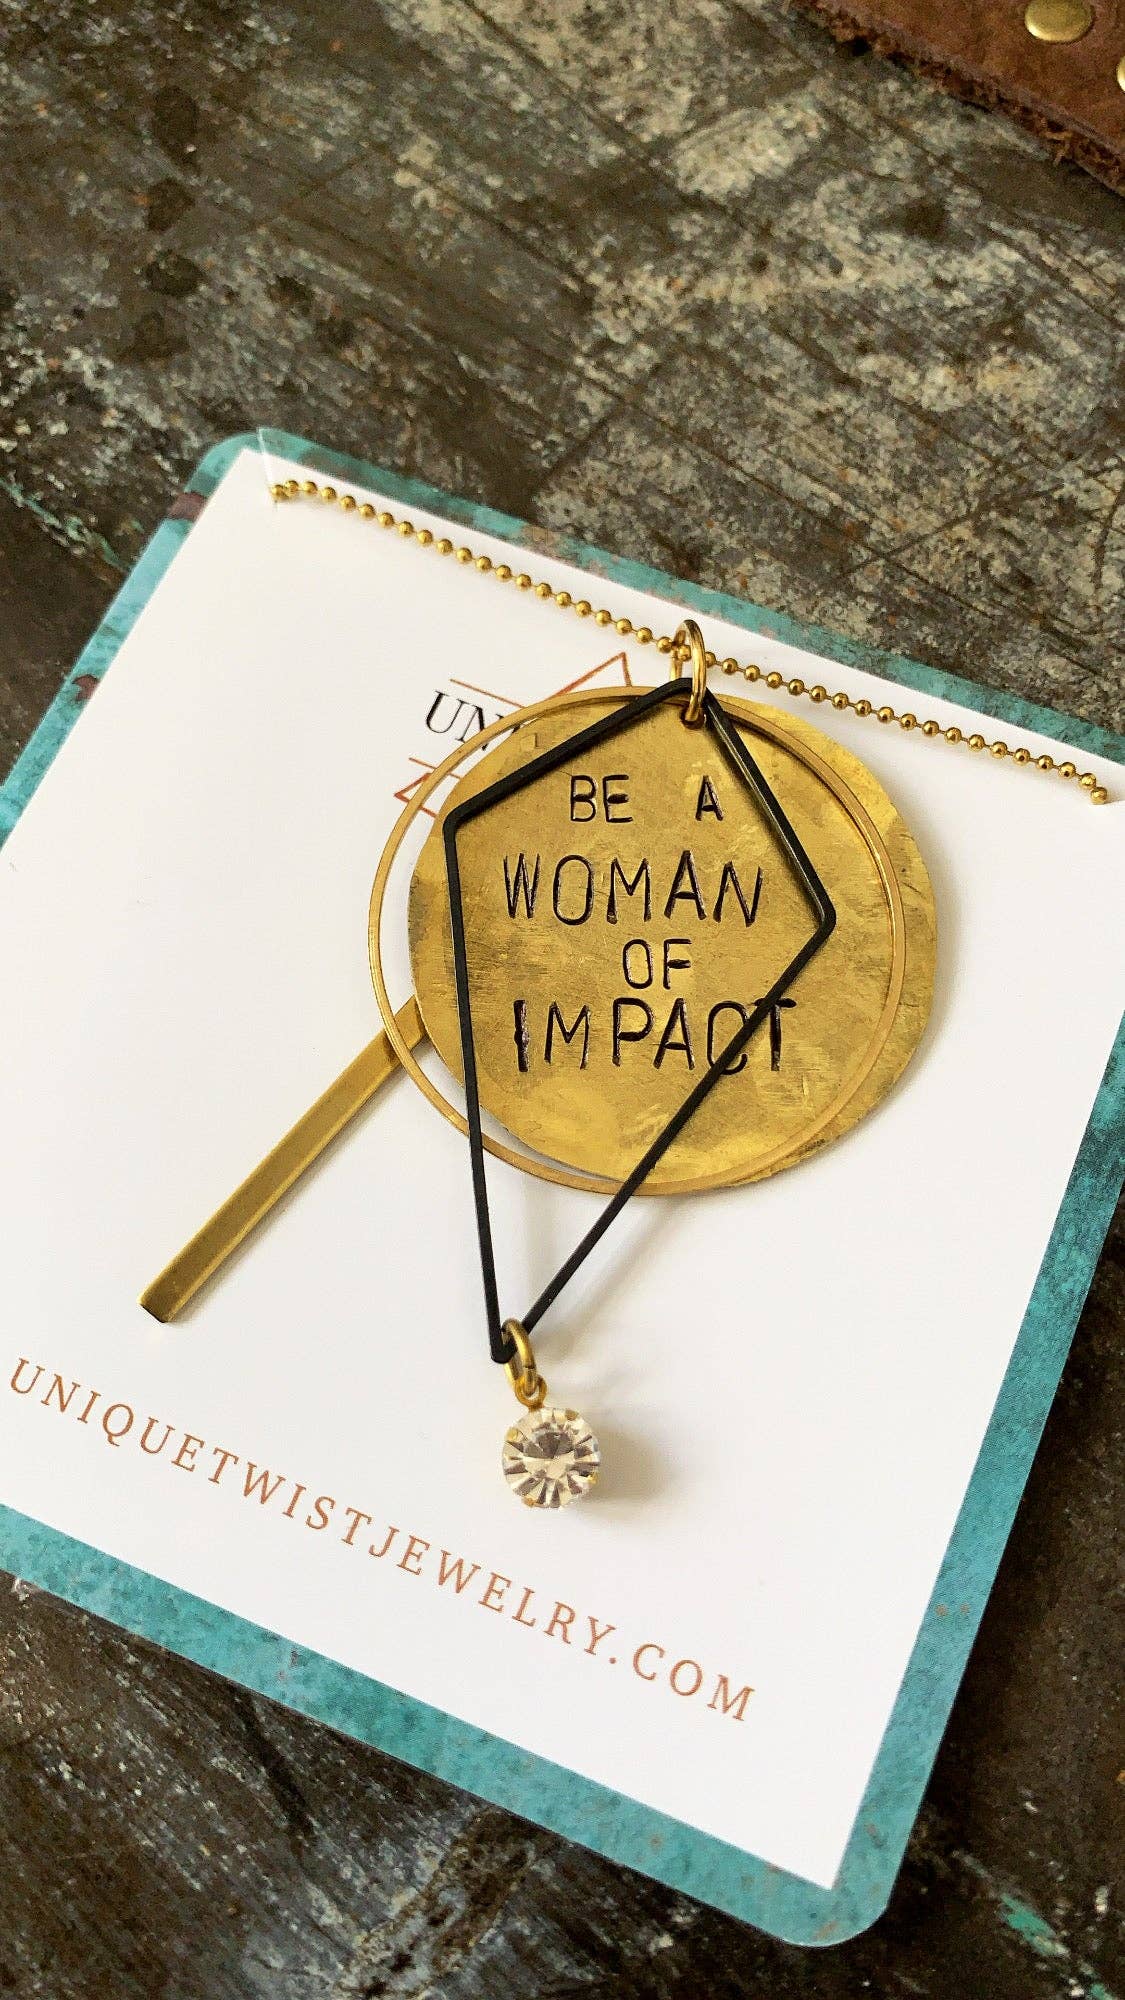 Unique Twist Jewelry - Be a Woman of Impact Hand-stamped Necklace